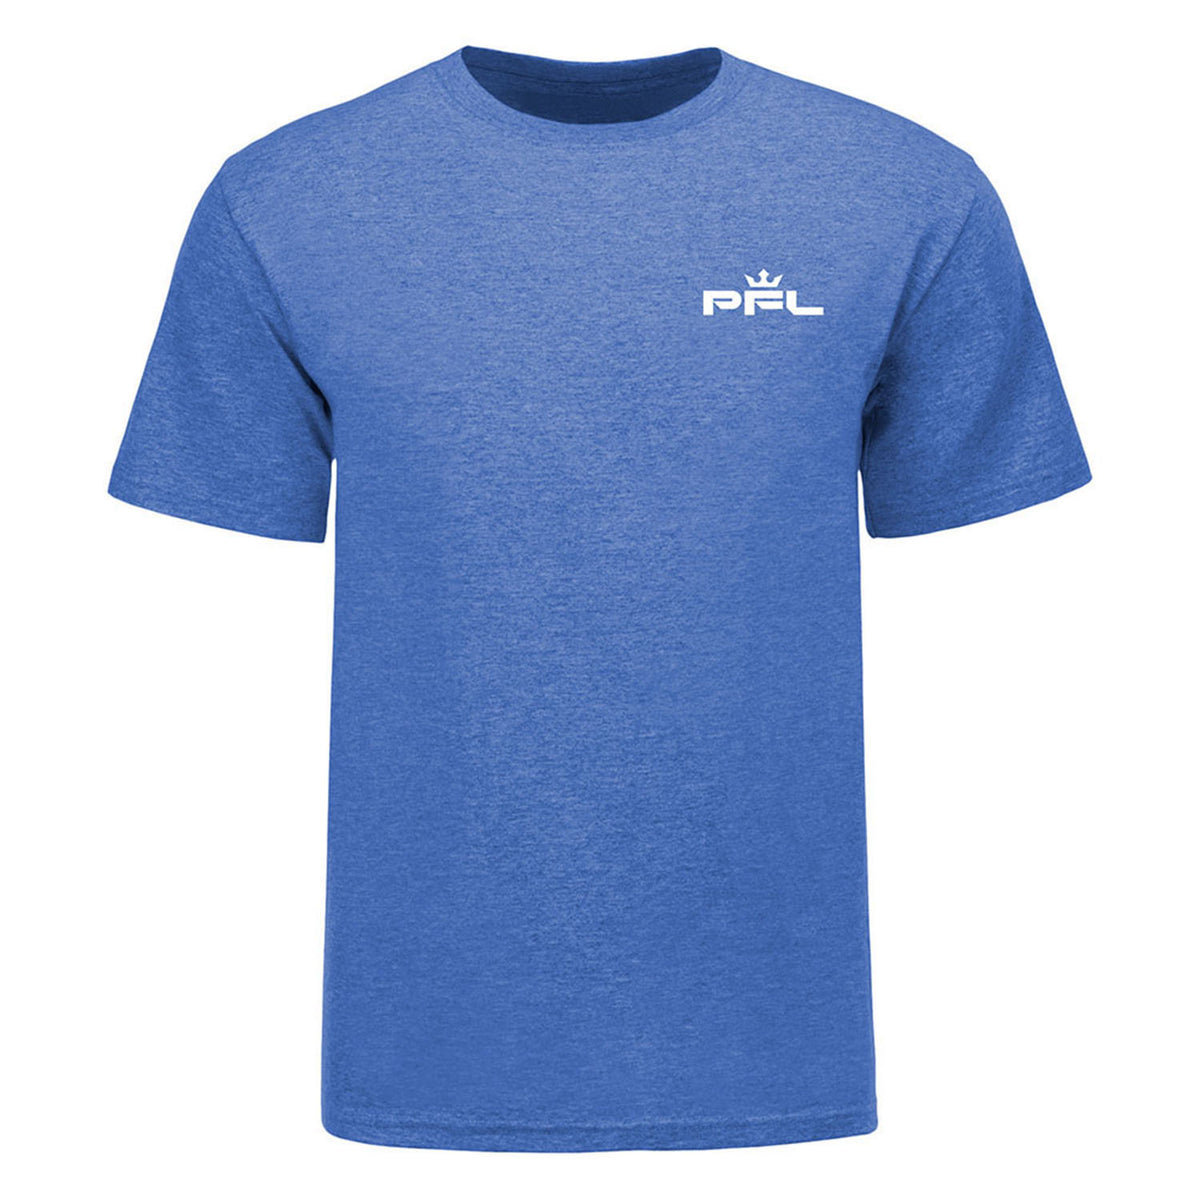 PFL Logo T-Shirt in Blue - Front View